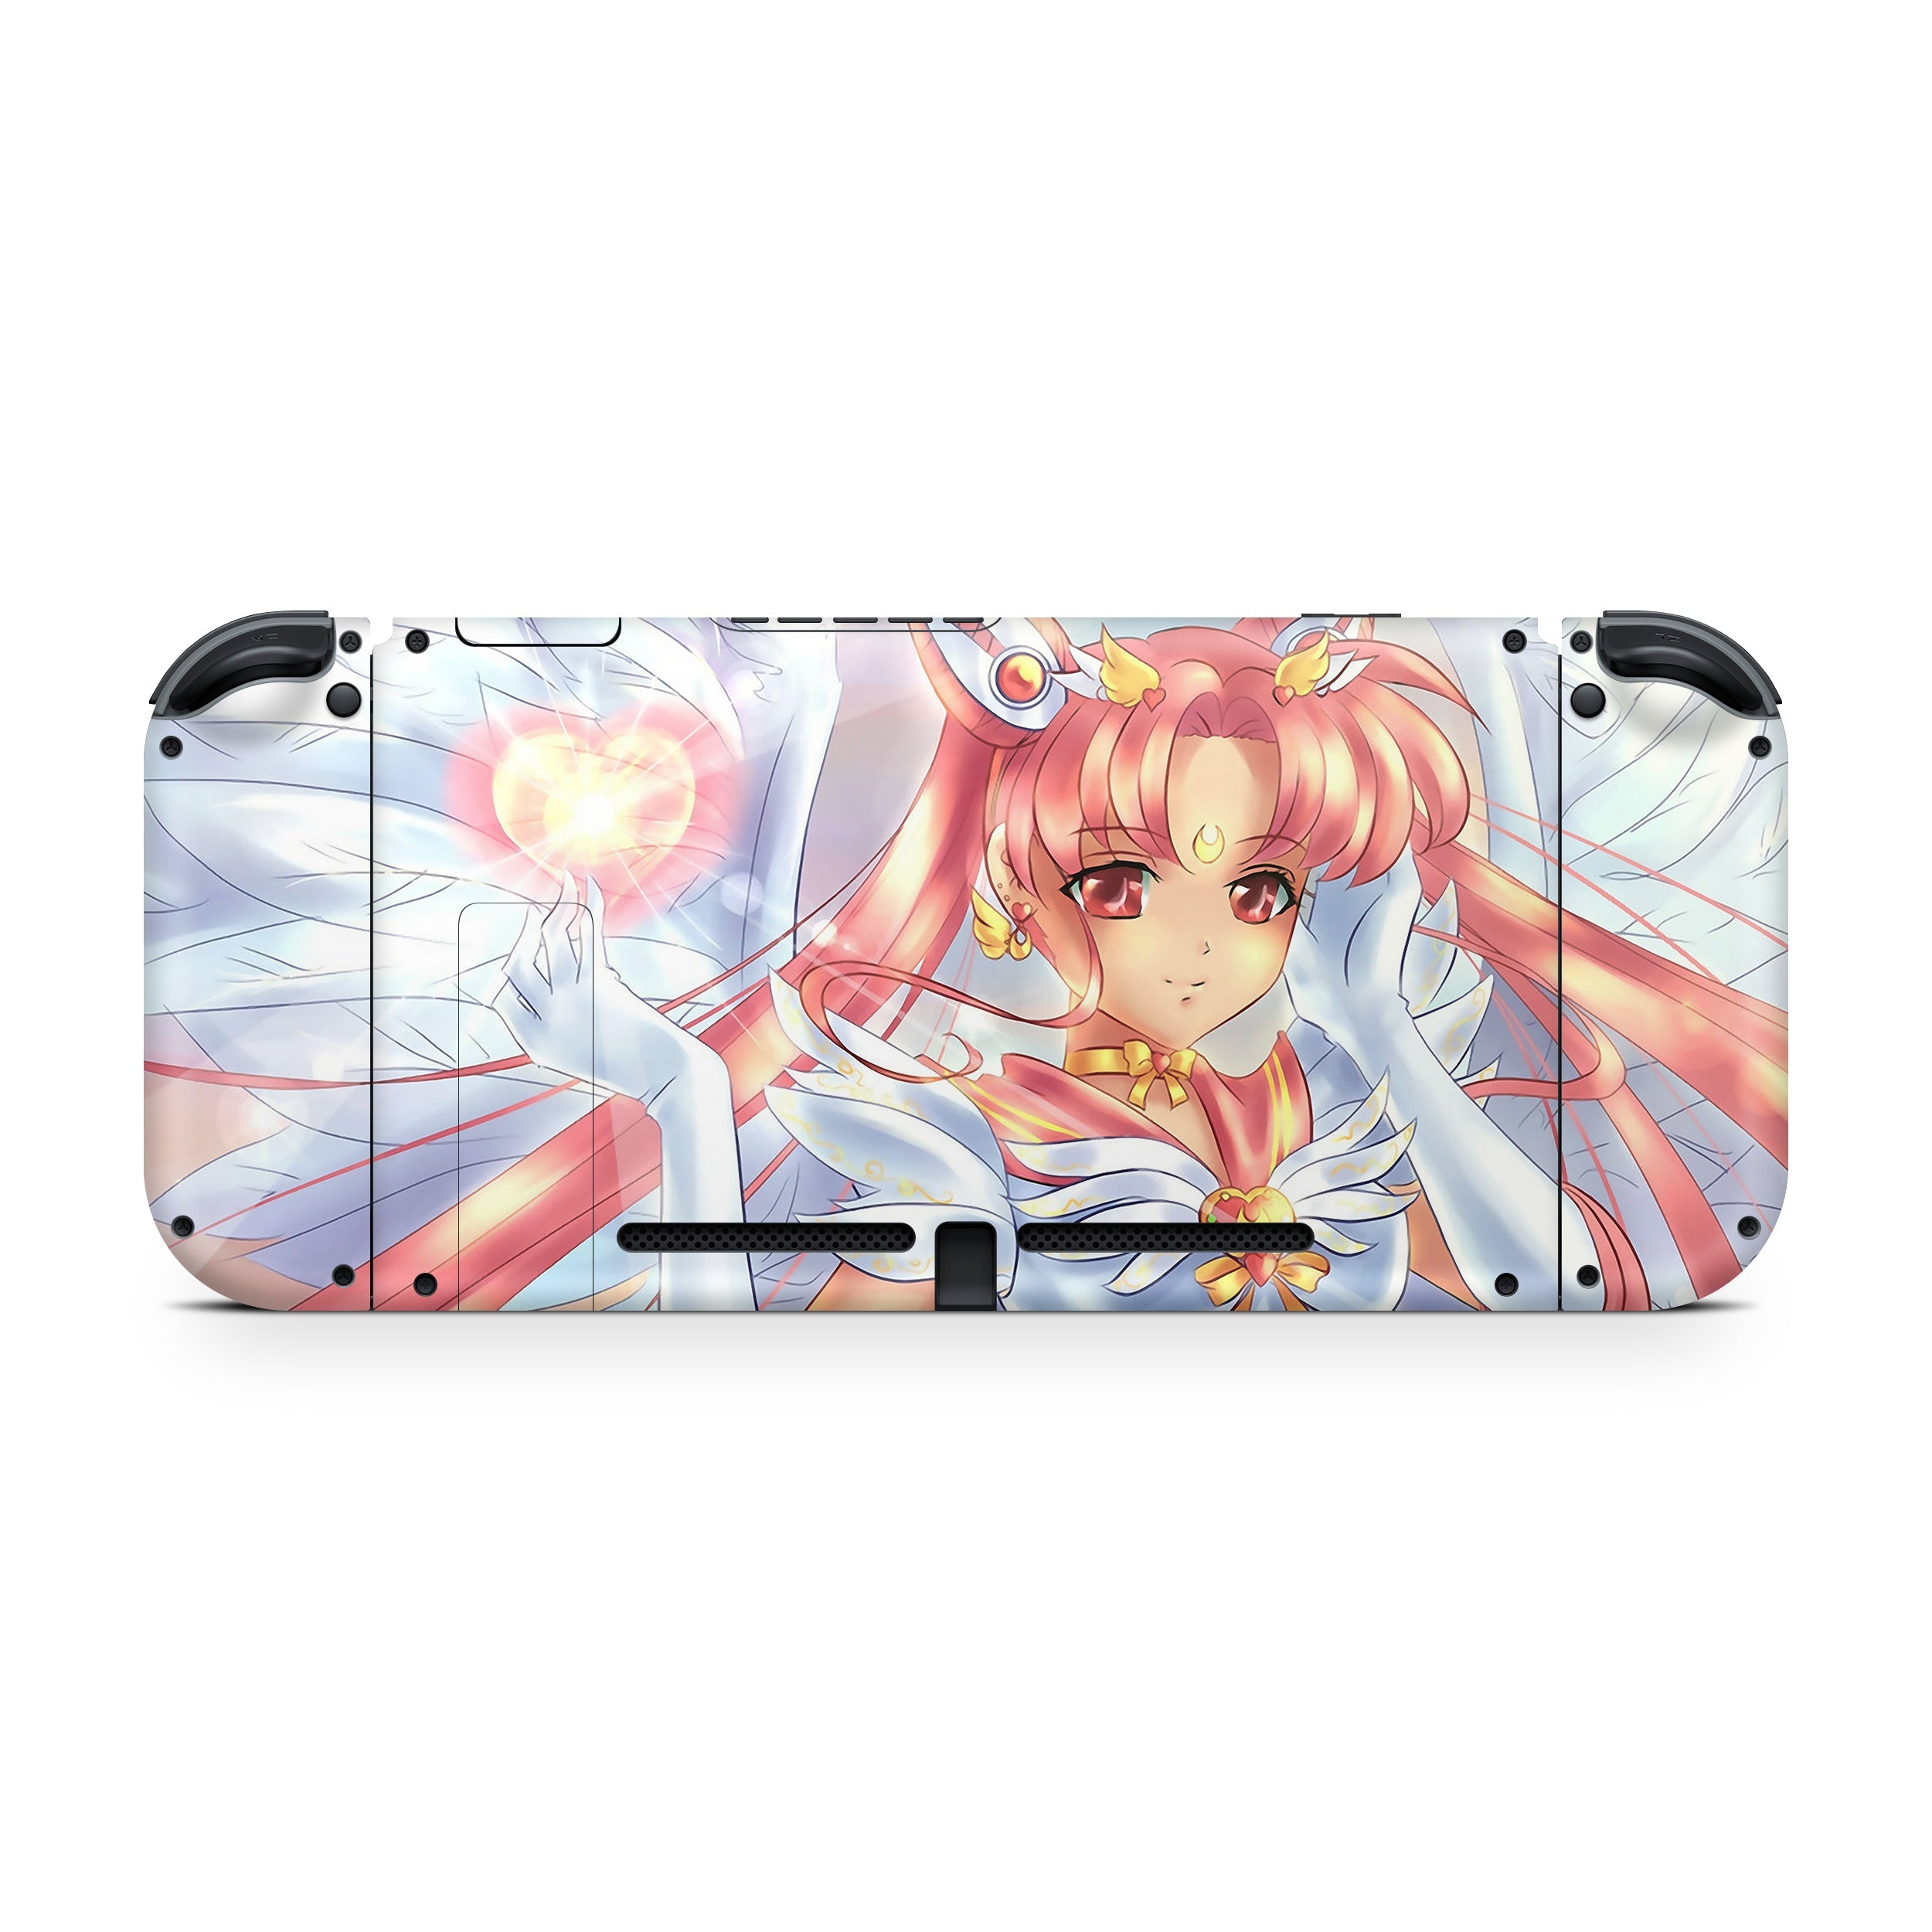 A video game skin featuring a Sailor Moon design for the Nintendo Switch.